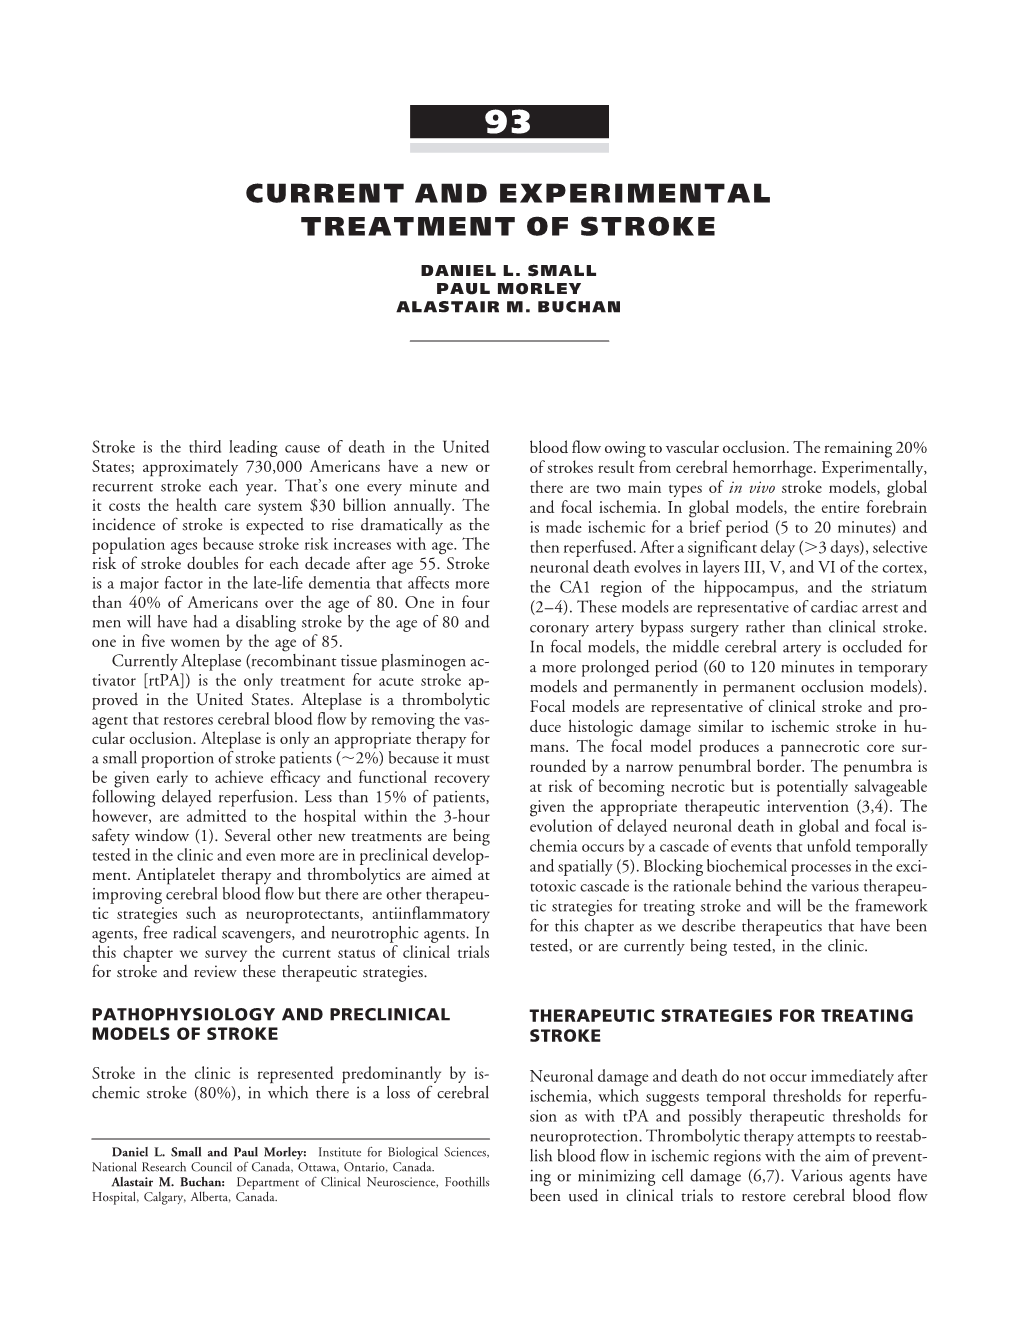 Current and Experimental Treatment of Stroke (PDF)